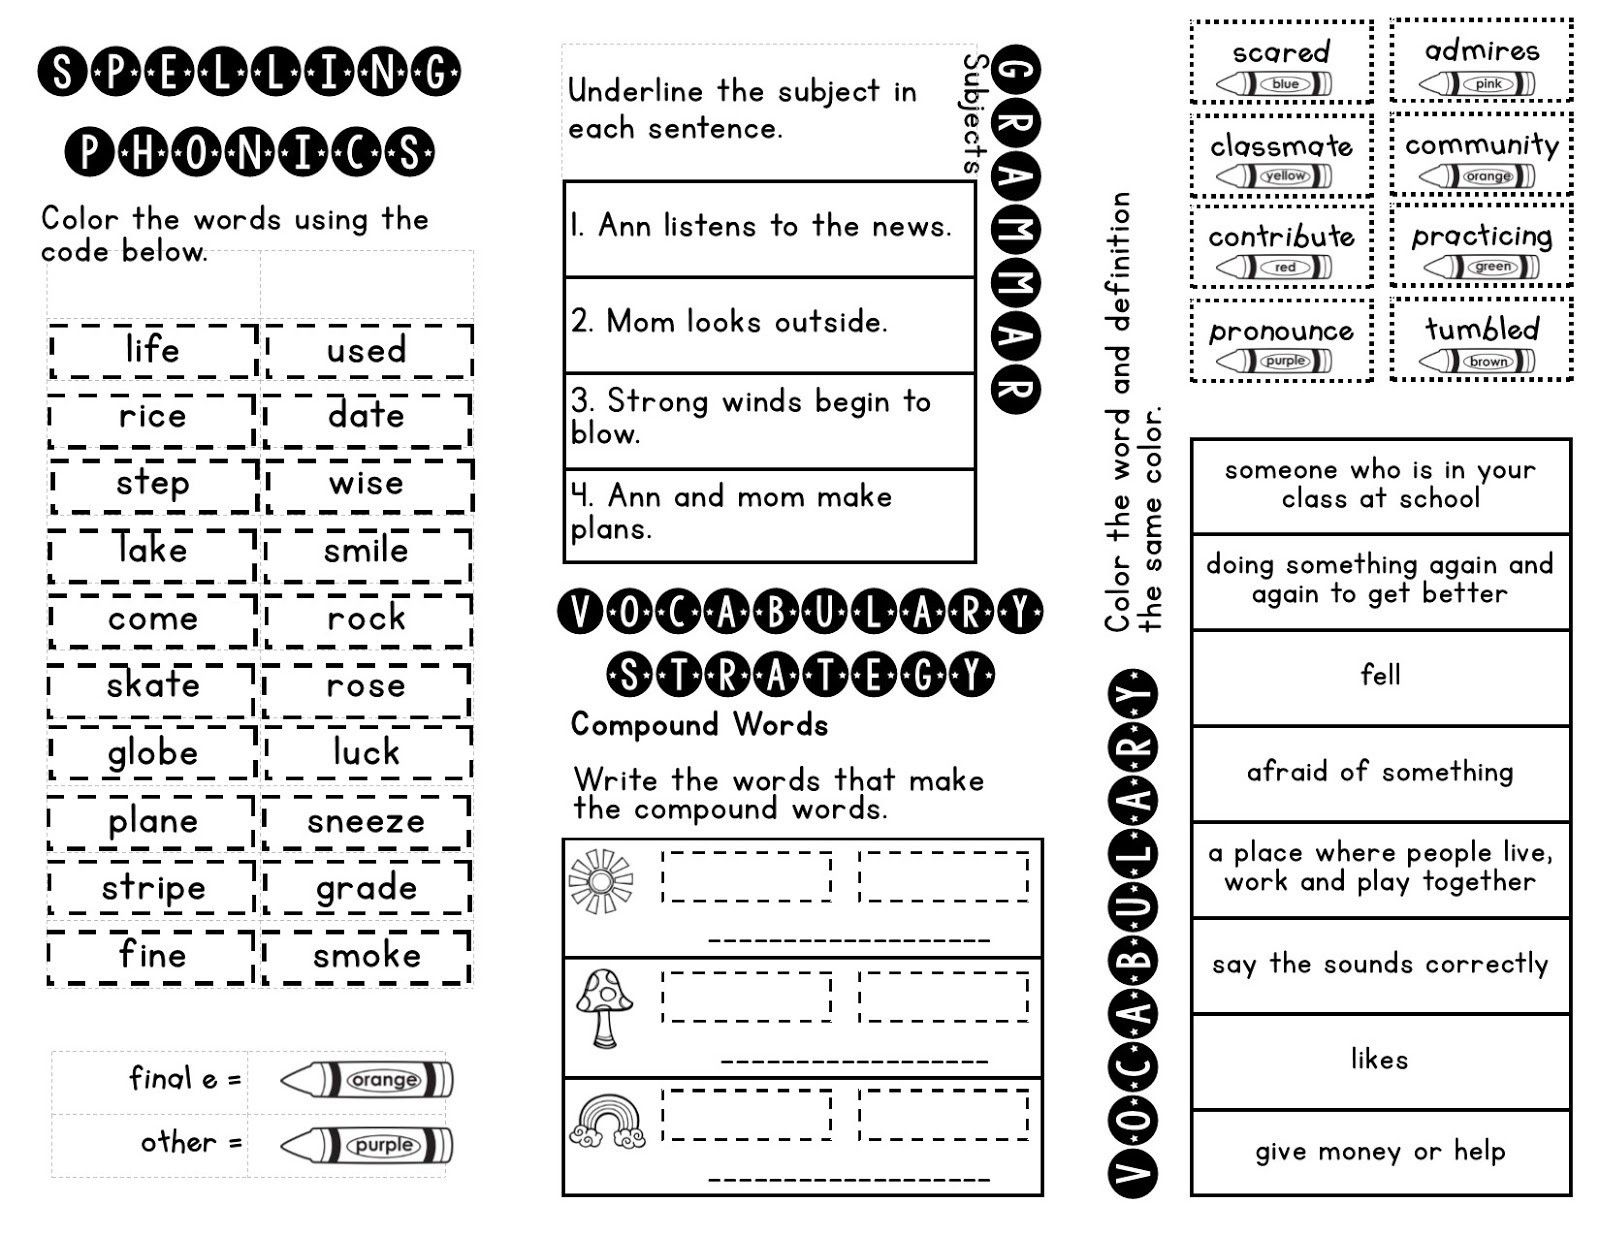 Free Math Worksheets Second Grade 2 Subtraction Subtract 2 Digit Numbers Missing Numbers No Regrouping